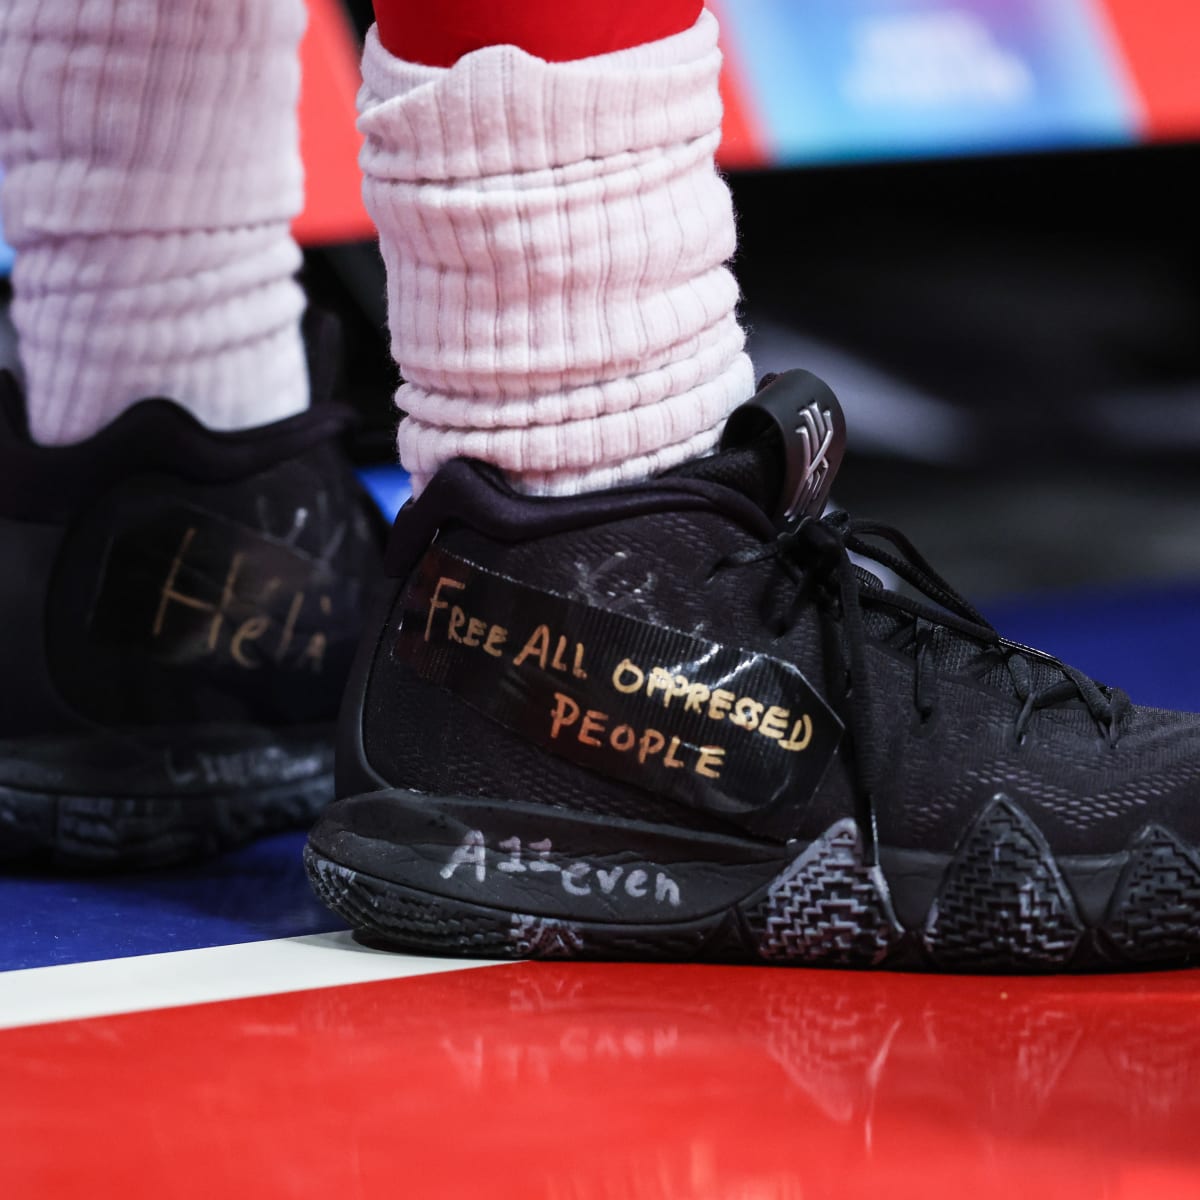 PHOTOS: Kyrie Irving's 'Afrakan Liberation' sneakers and other NBA